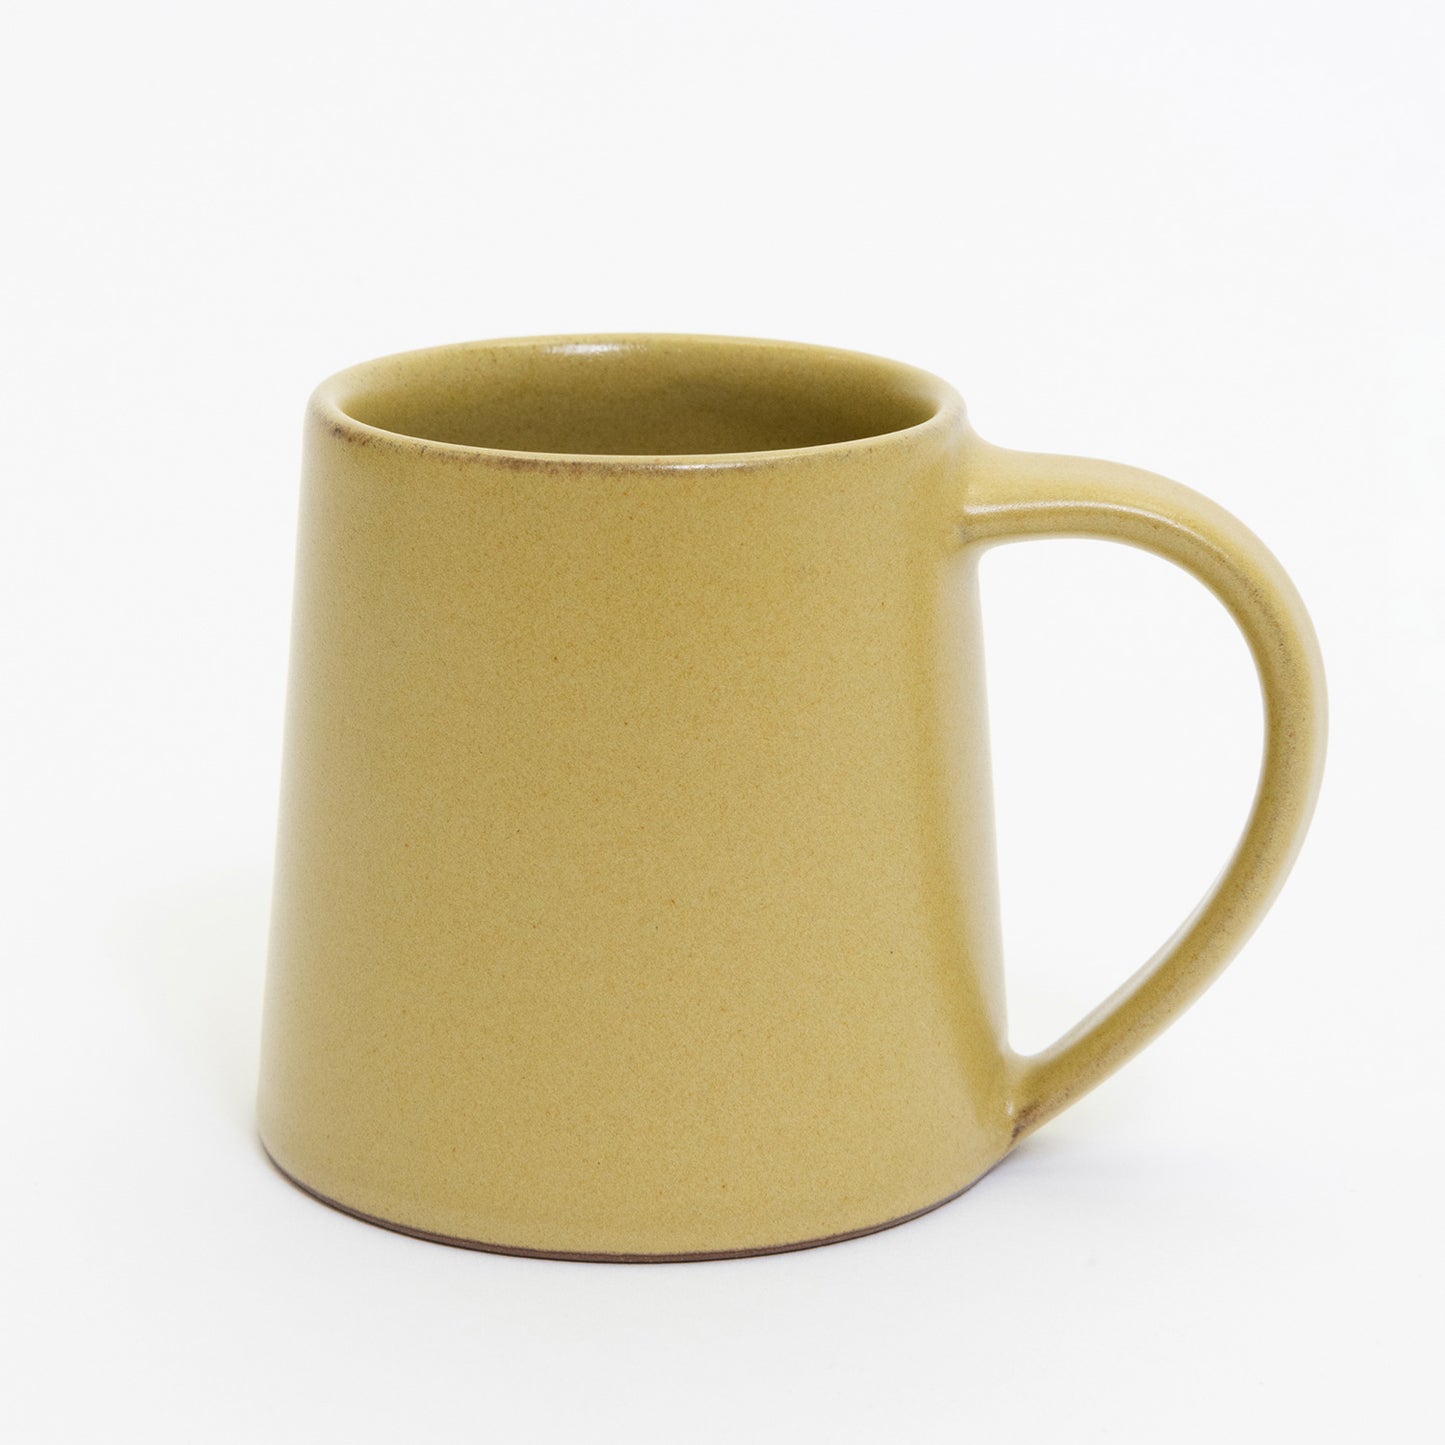 A mustard-yellow stoneware mug pictured on a white background.